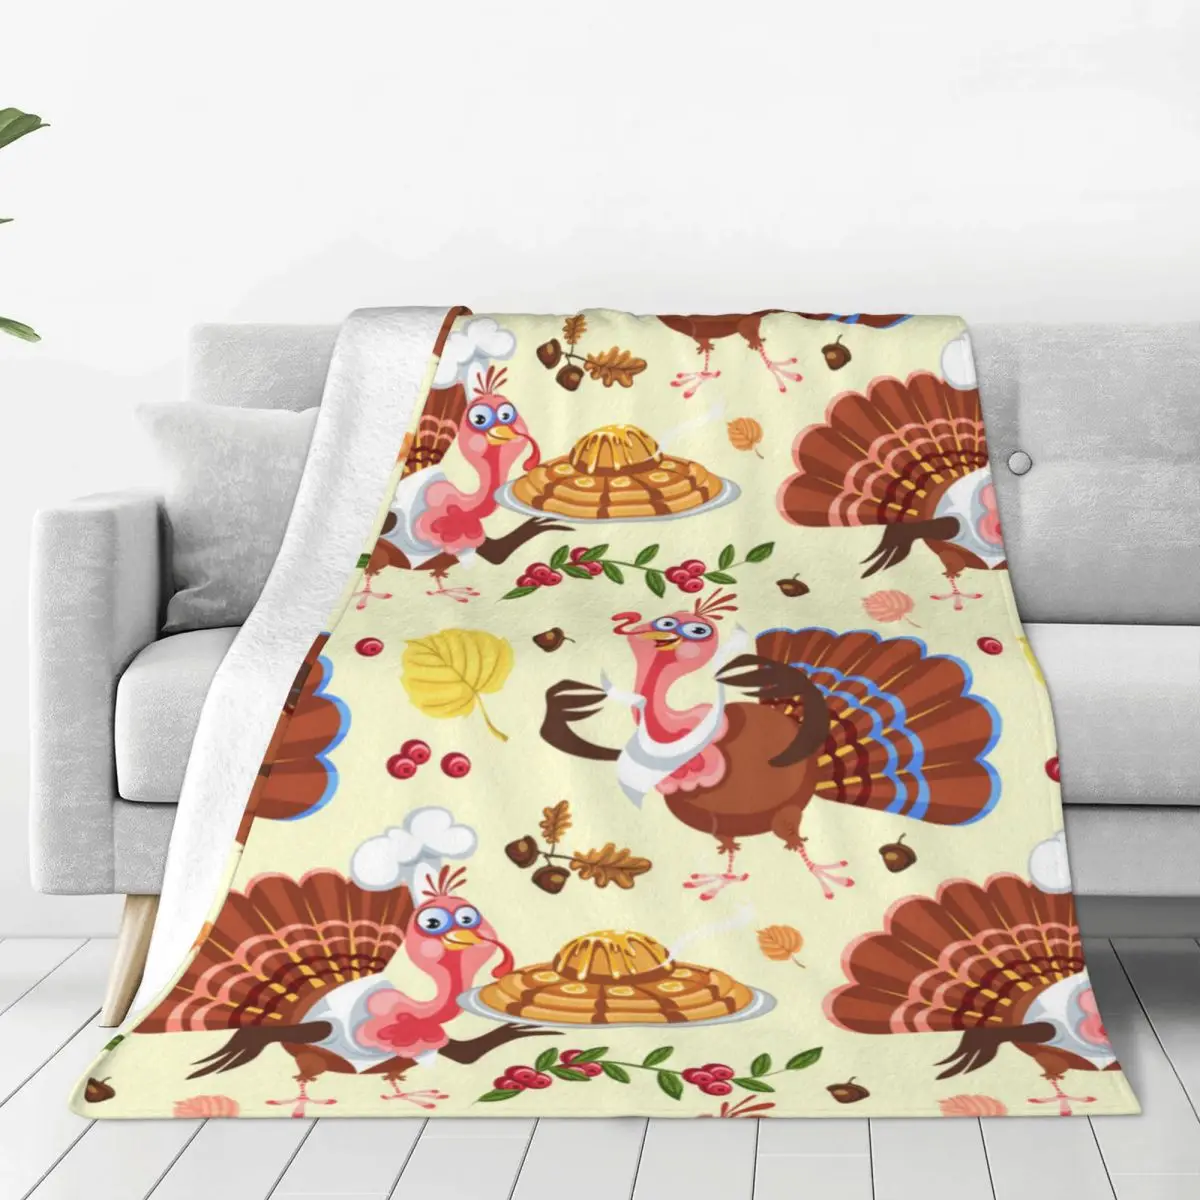 

Thanksgiving Turkey Soft Flannel Throw Blanket for Couch Bed Warm Blanket Lightweight Blankets for Sofa Travel Blanket